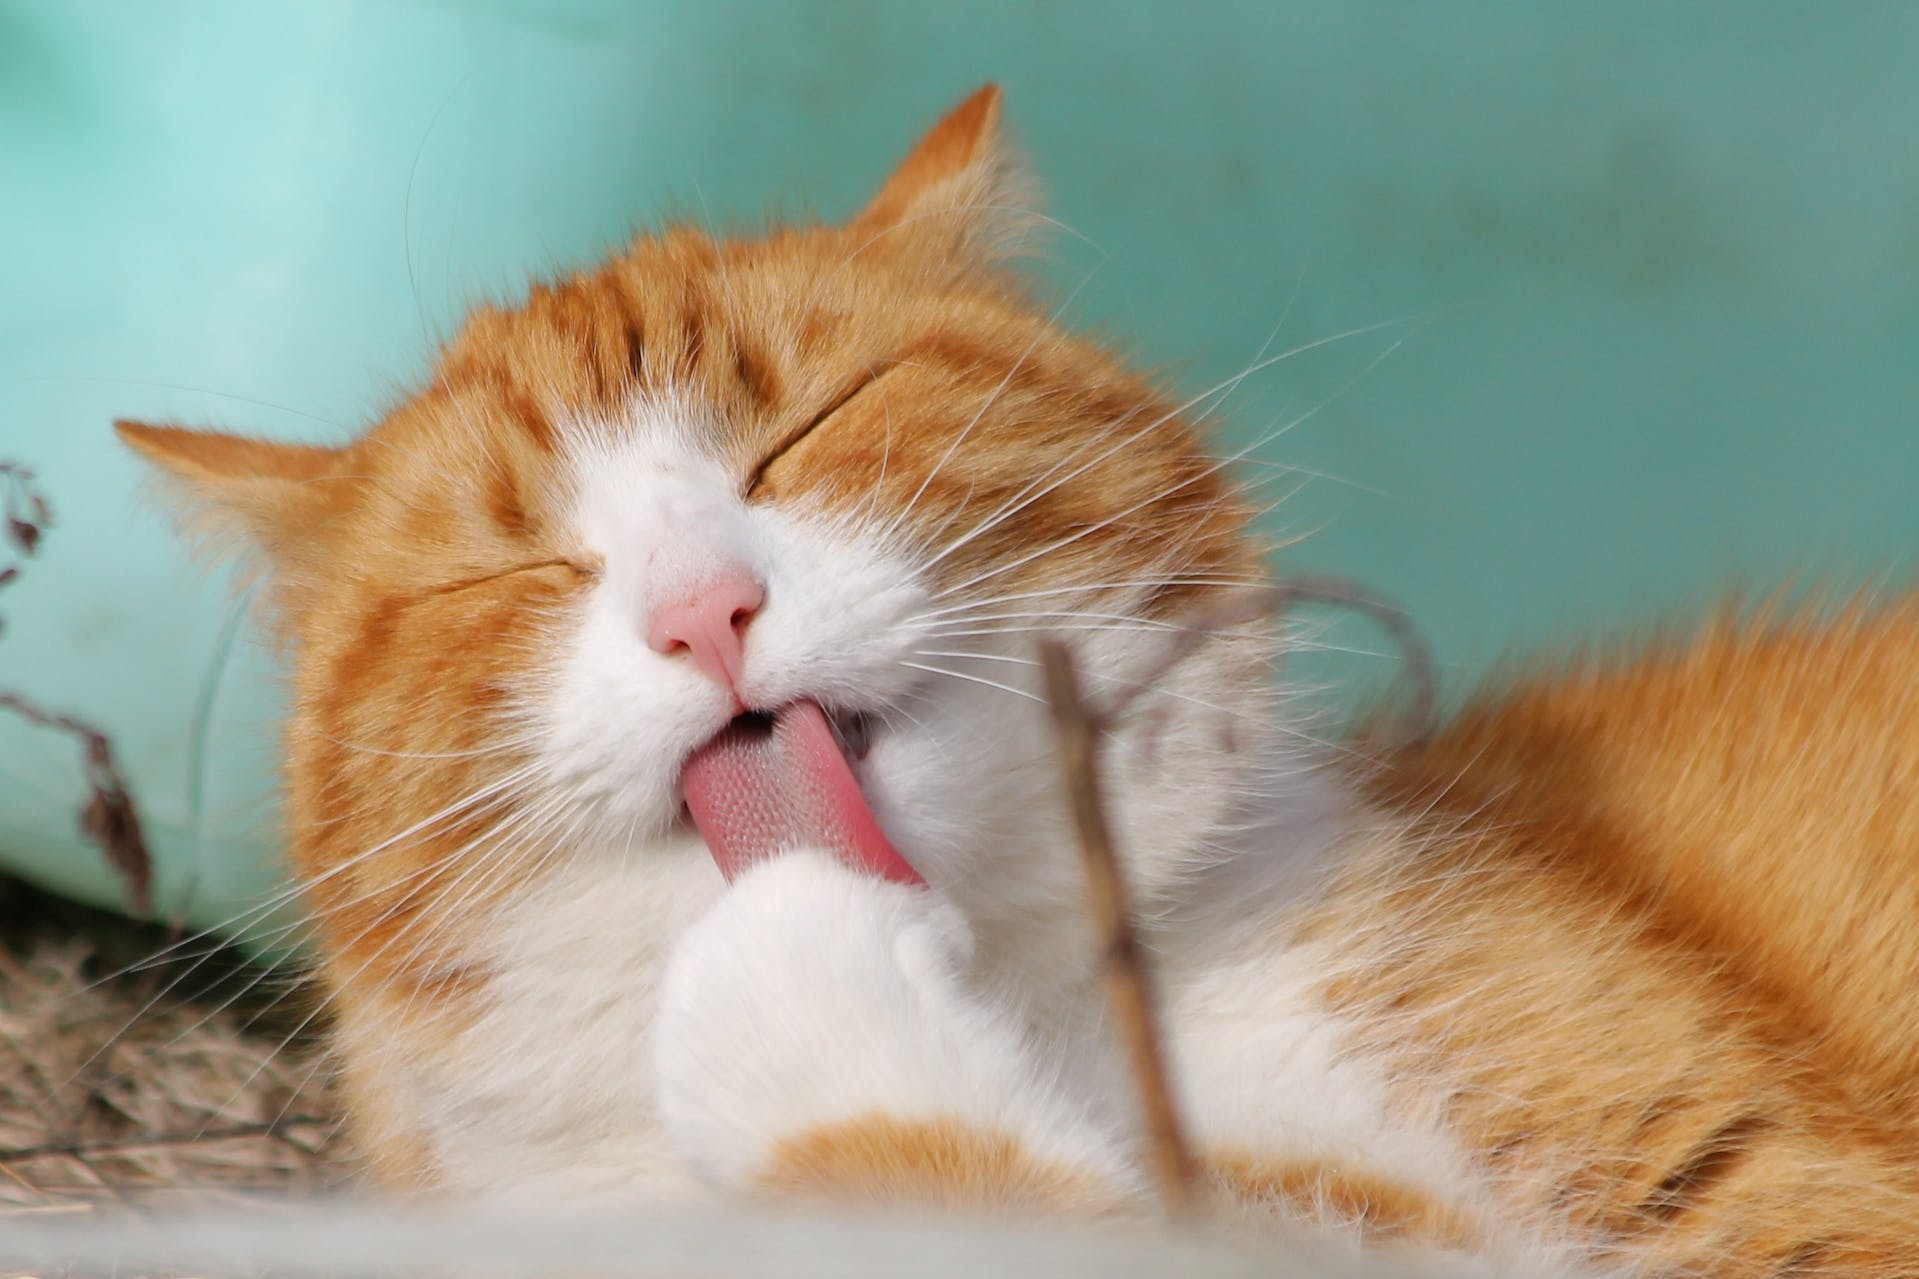 Ginger cat with tongue out. | Source: Pexels